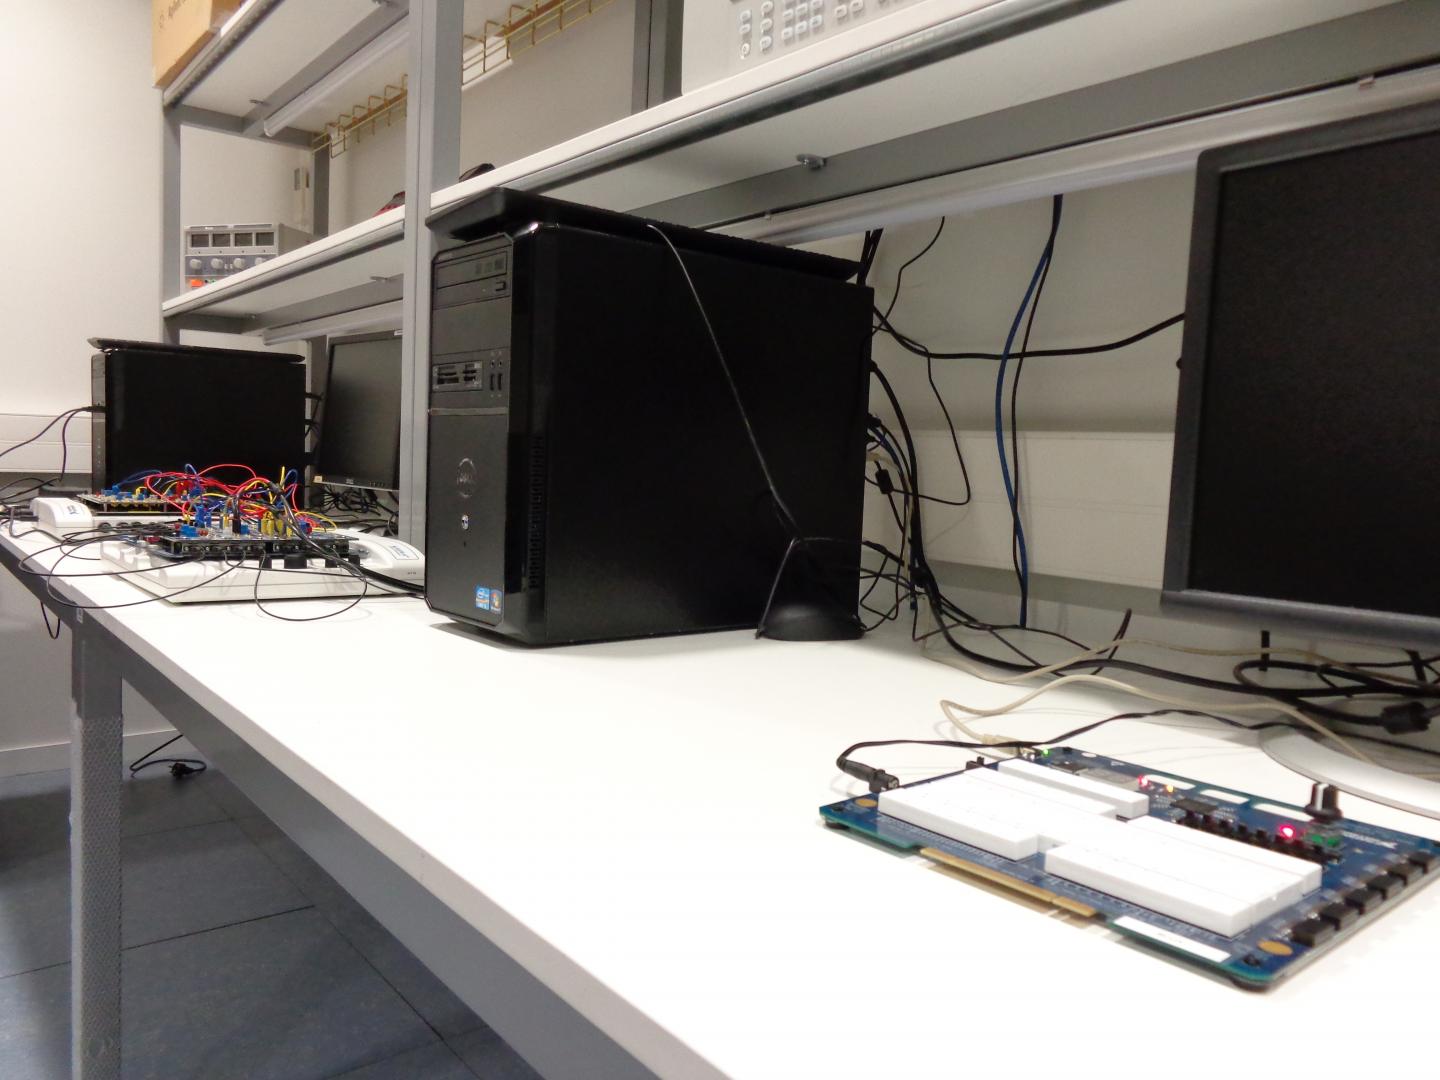 The UOC's remote laboratory for performing experiments for computer science